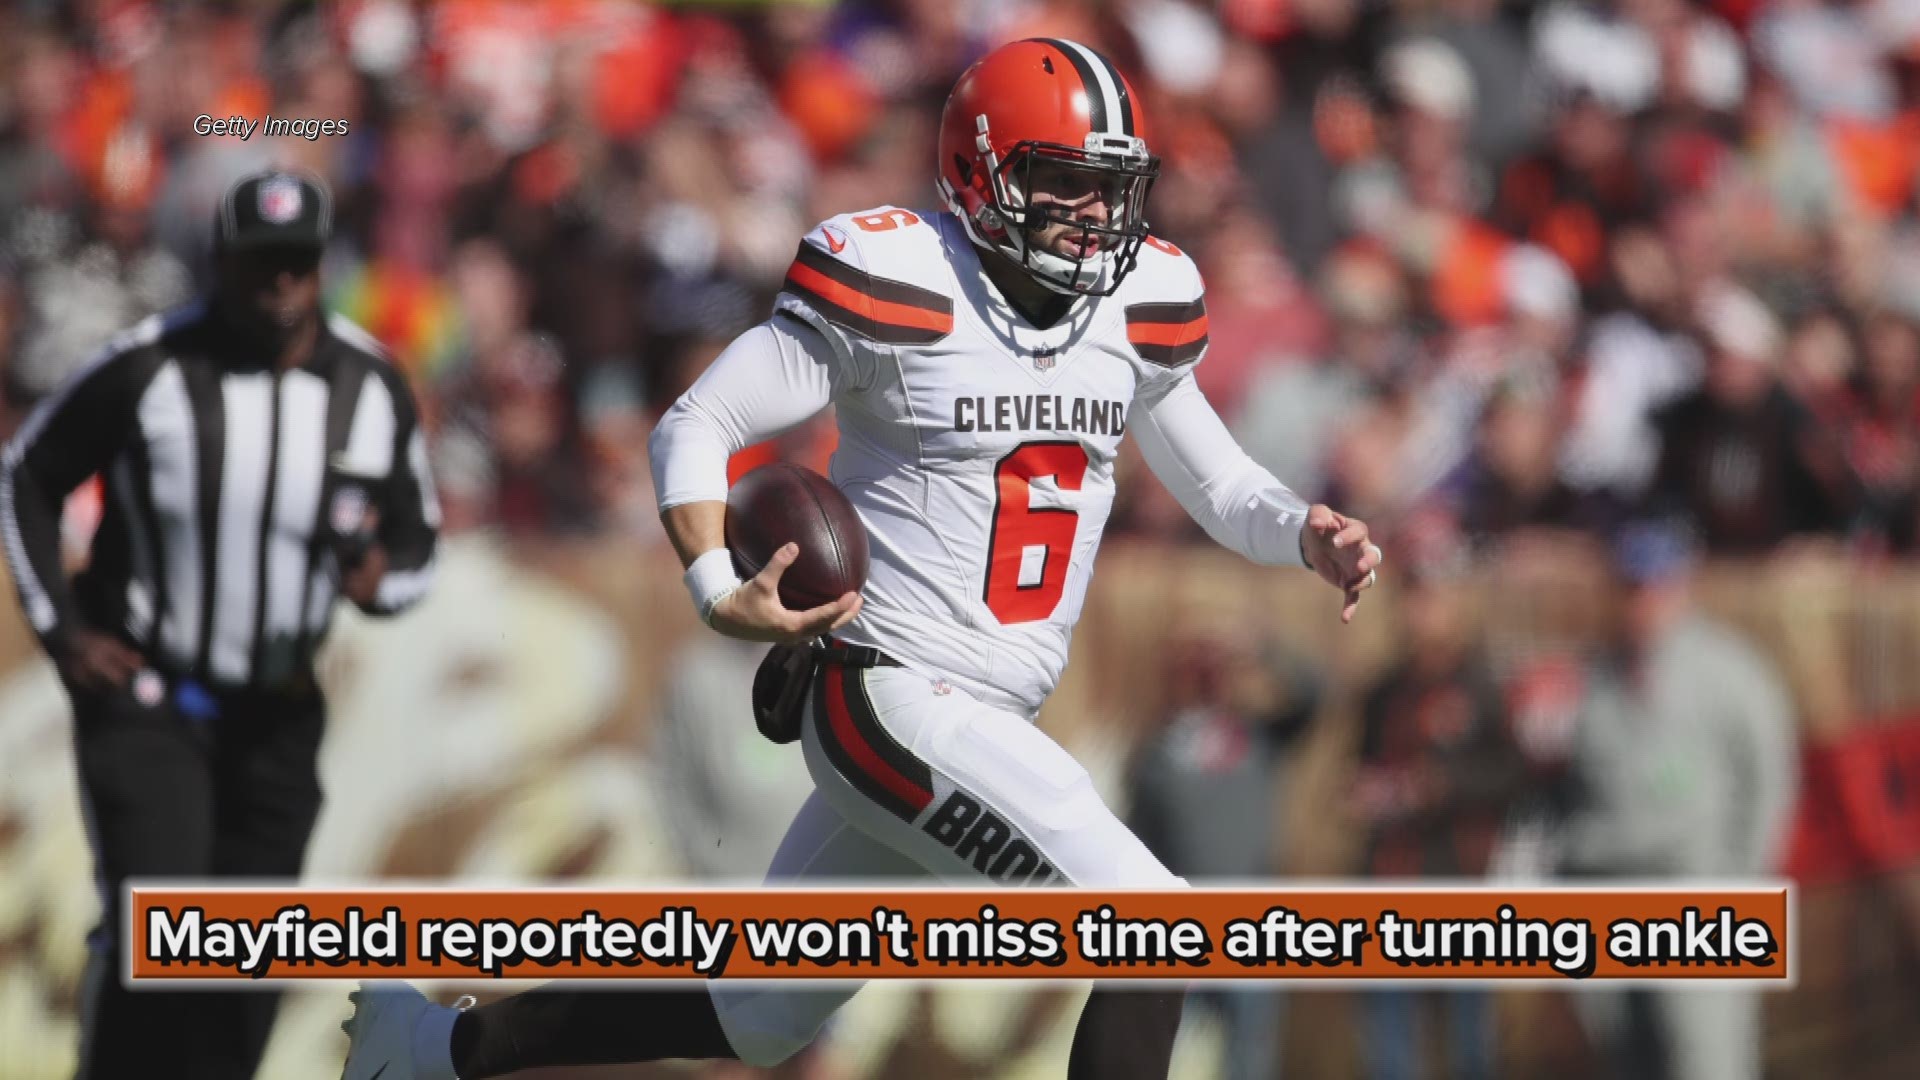 REPORT: Cleveland Browns QB Baker Mayfield turned ankle vs. Los Angeles Chargers, won't miss time